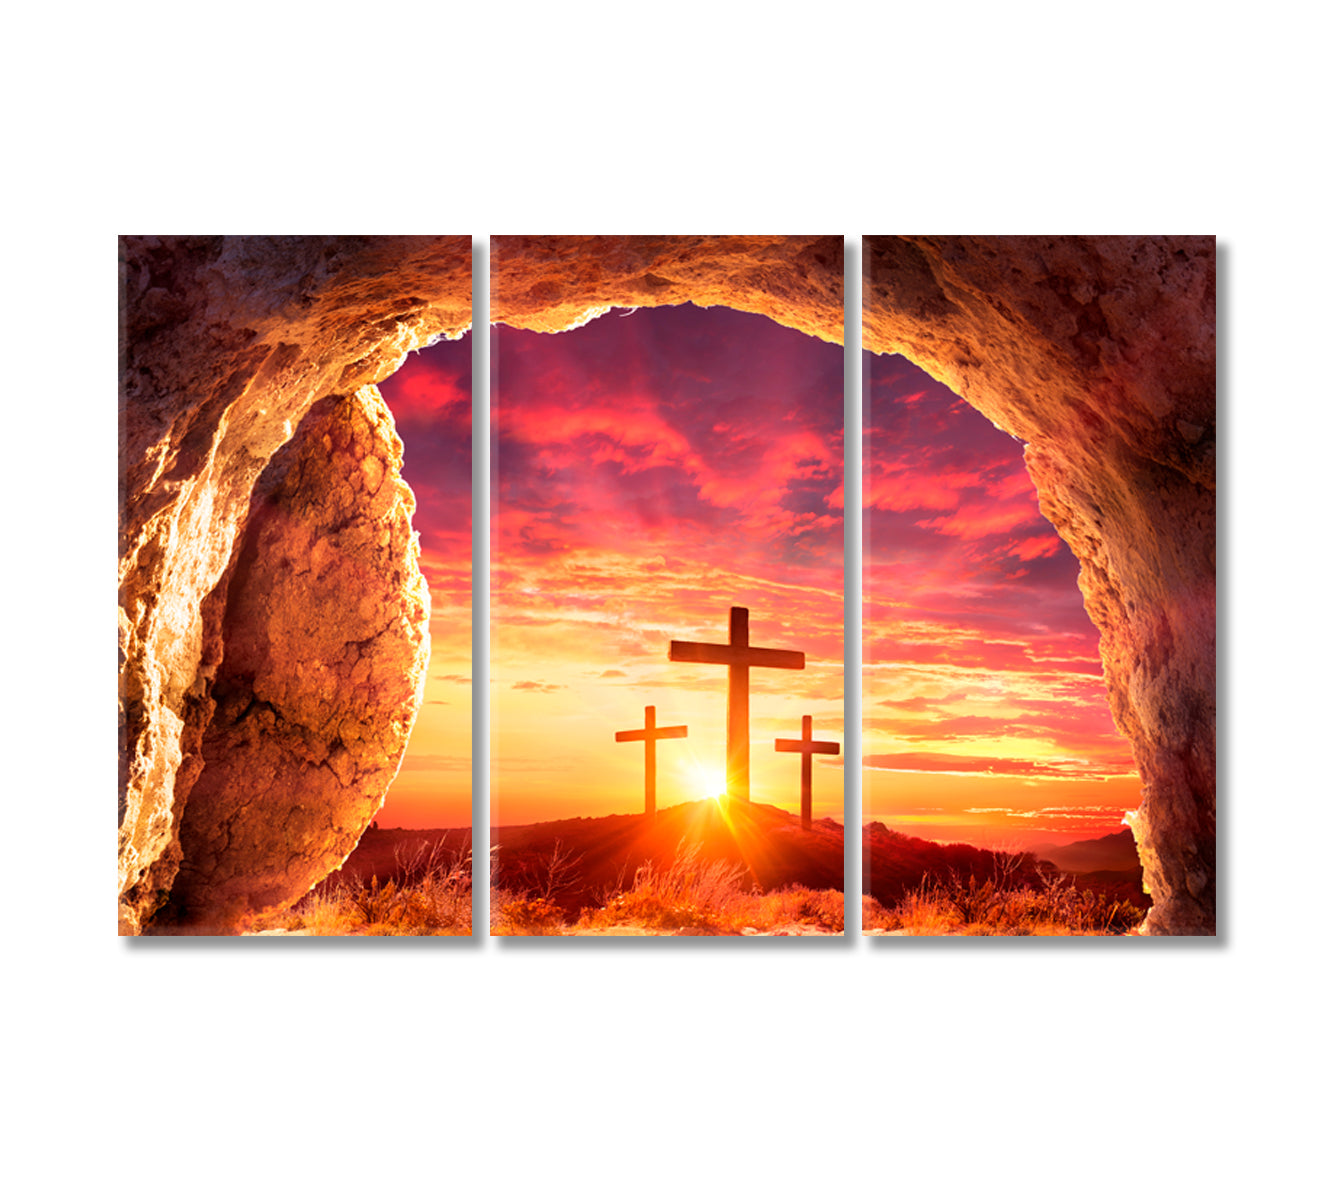 Empty Tomb With Three Crosses On Hill Canvas Print-Canvas Print-CetArt-3 Panels-36x24 inches-CetArt